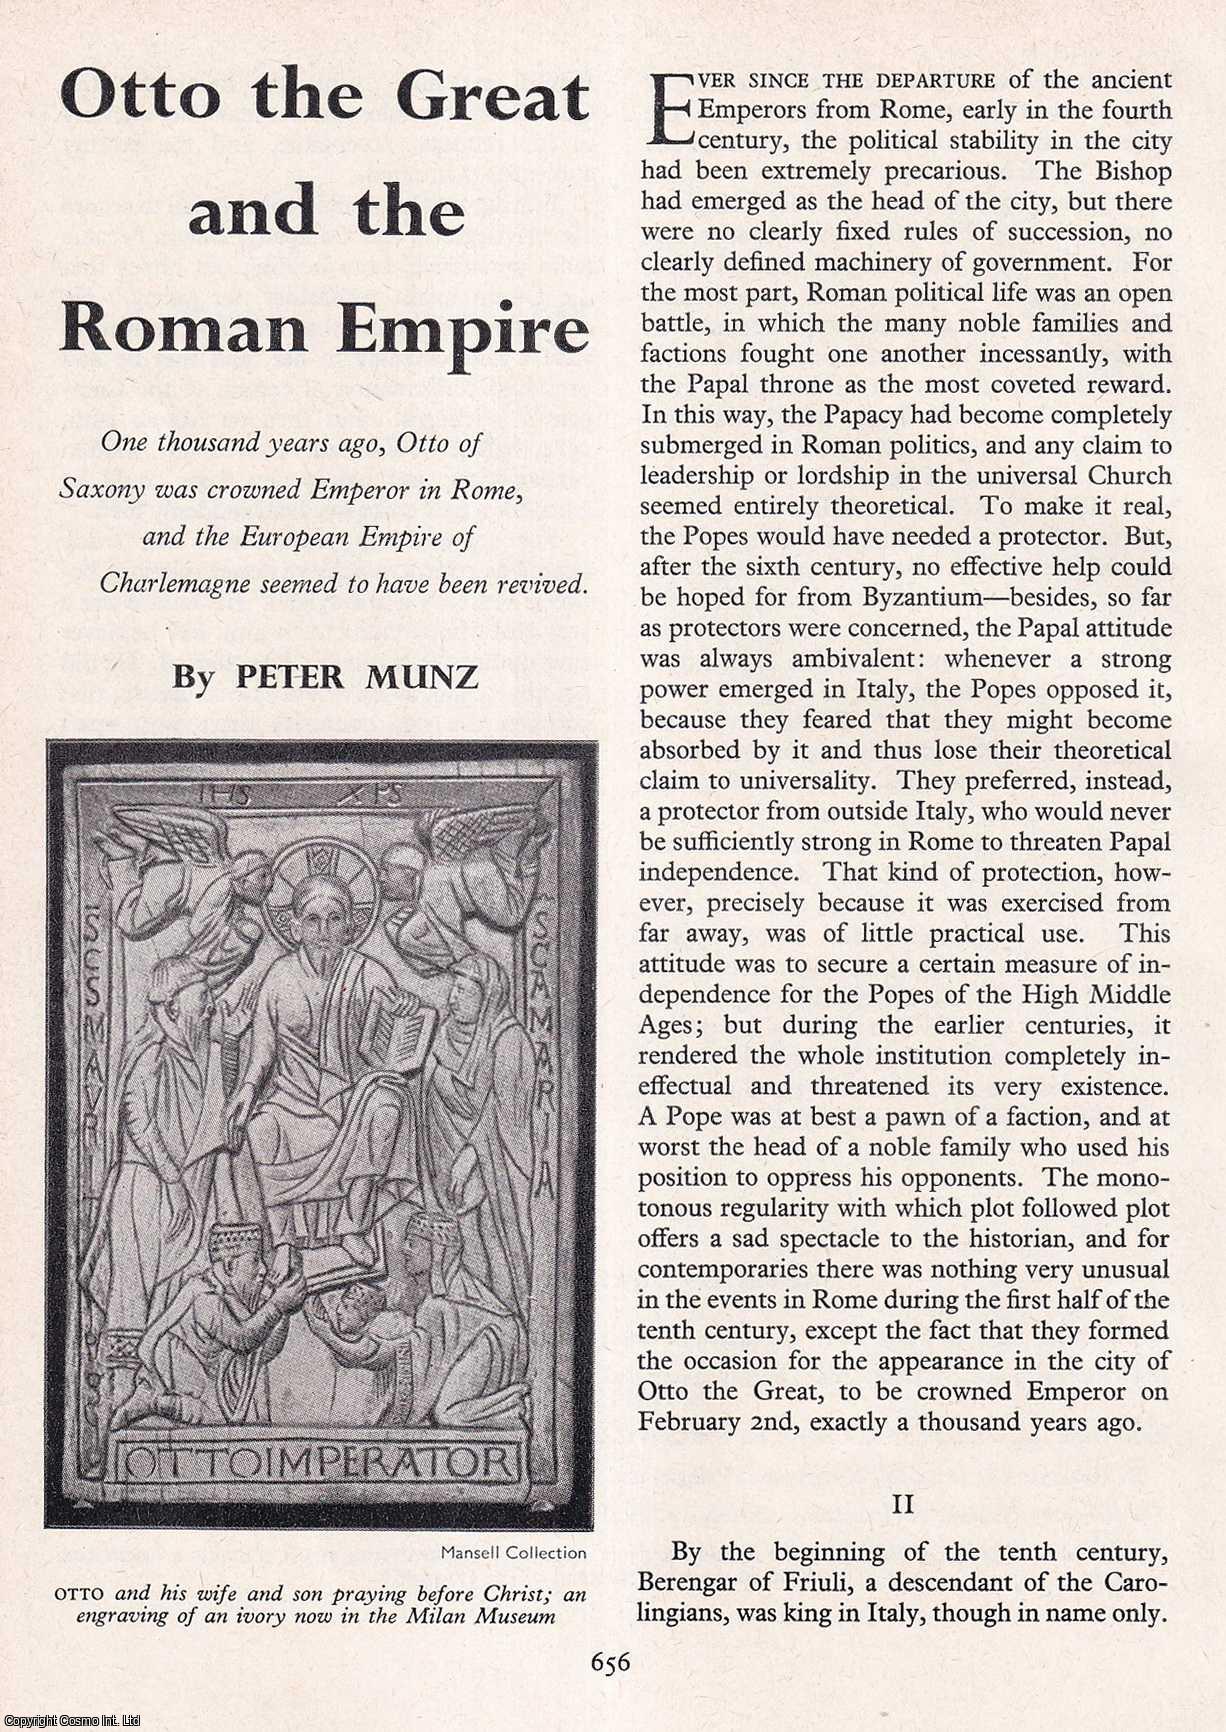 Peter Munz - Otto The Great and The Roman Empire. An original article from History Today magazine, 1962.